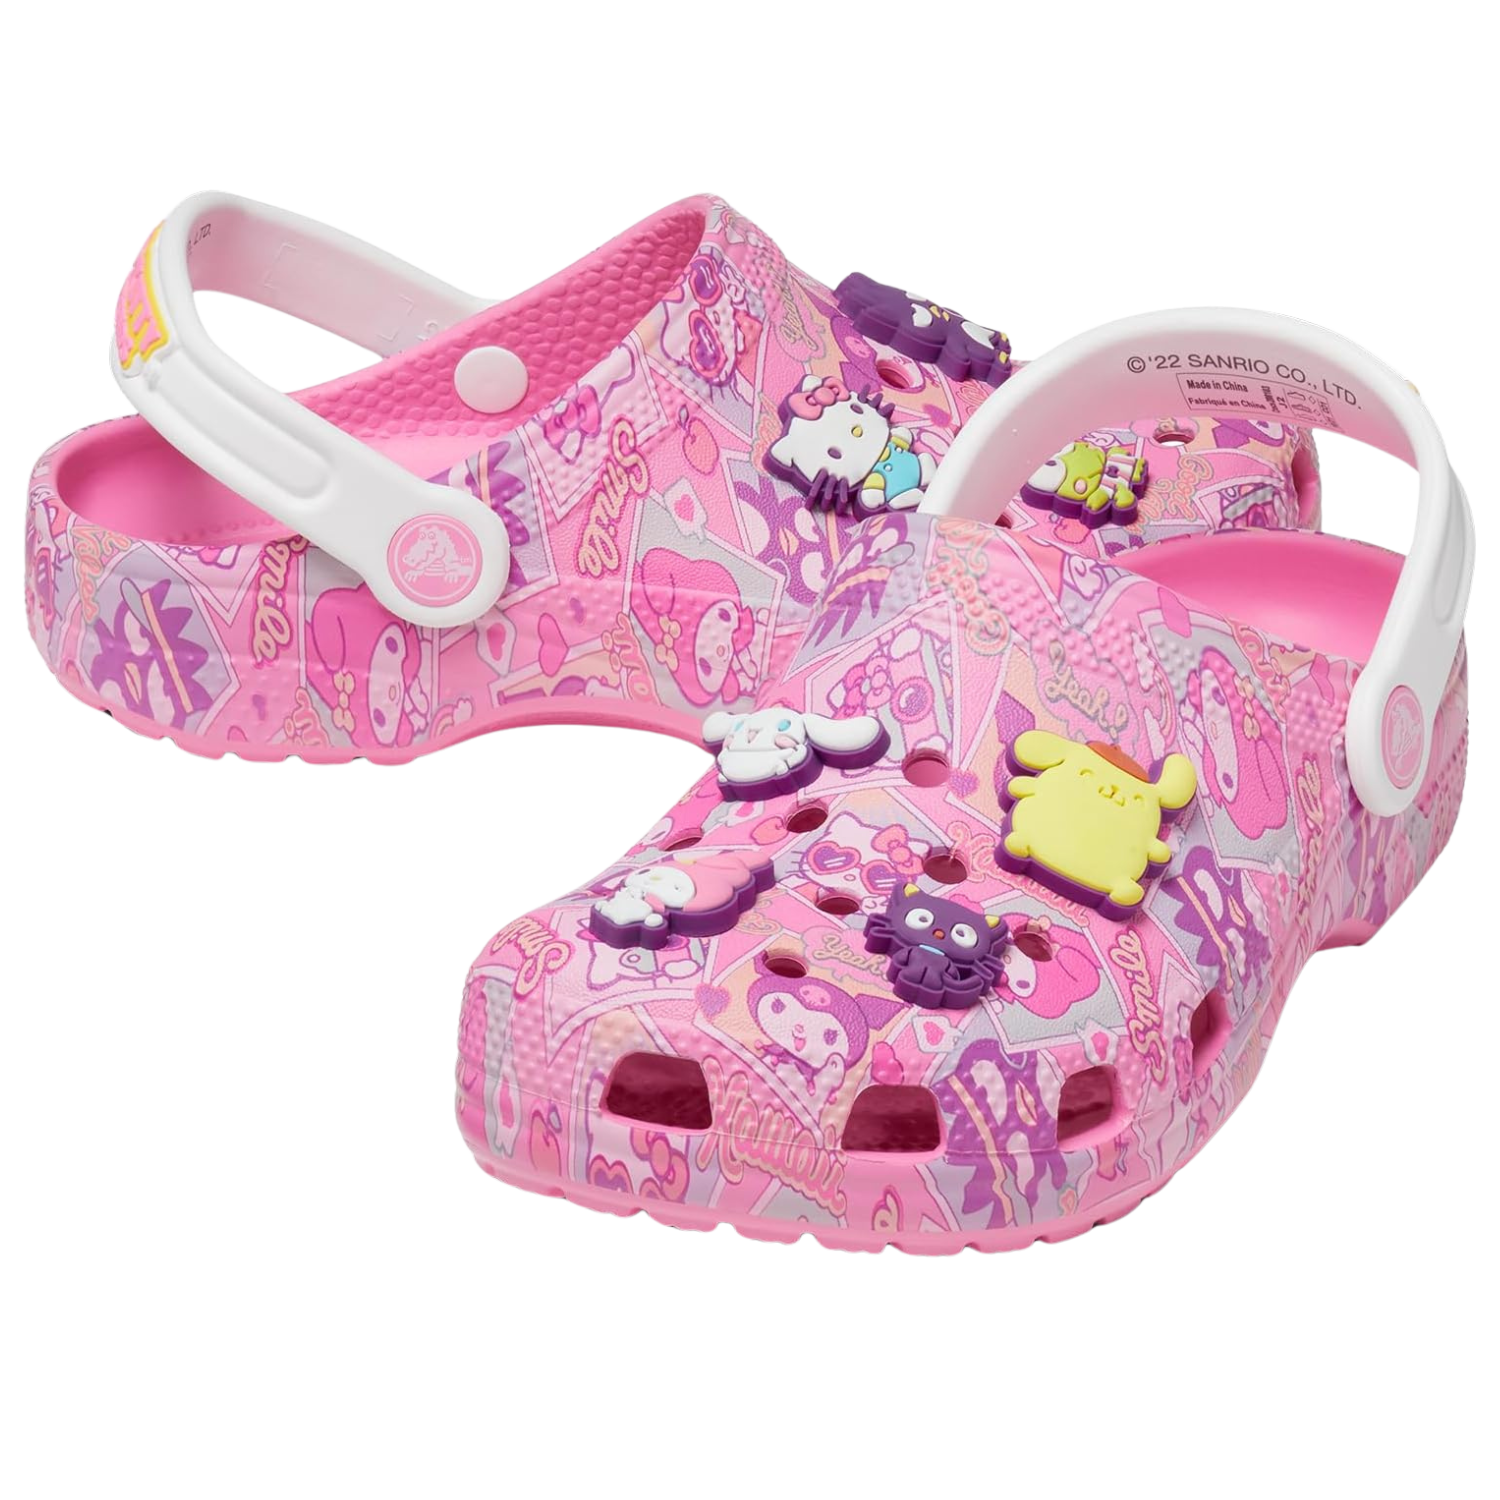 This image shows pink kid's croc with Hello Kitty characters on them. 